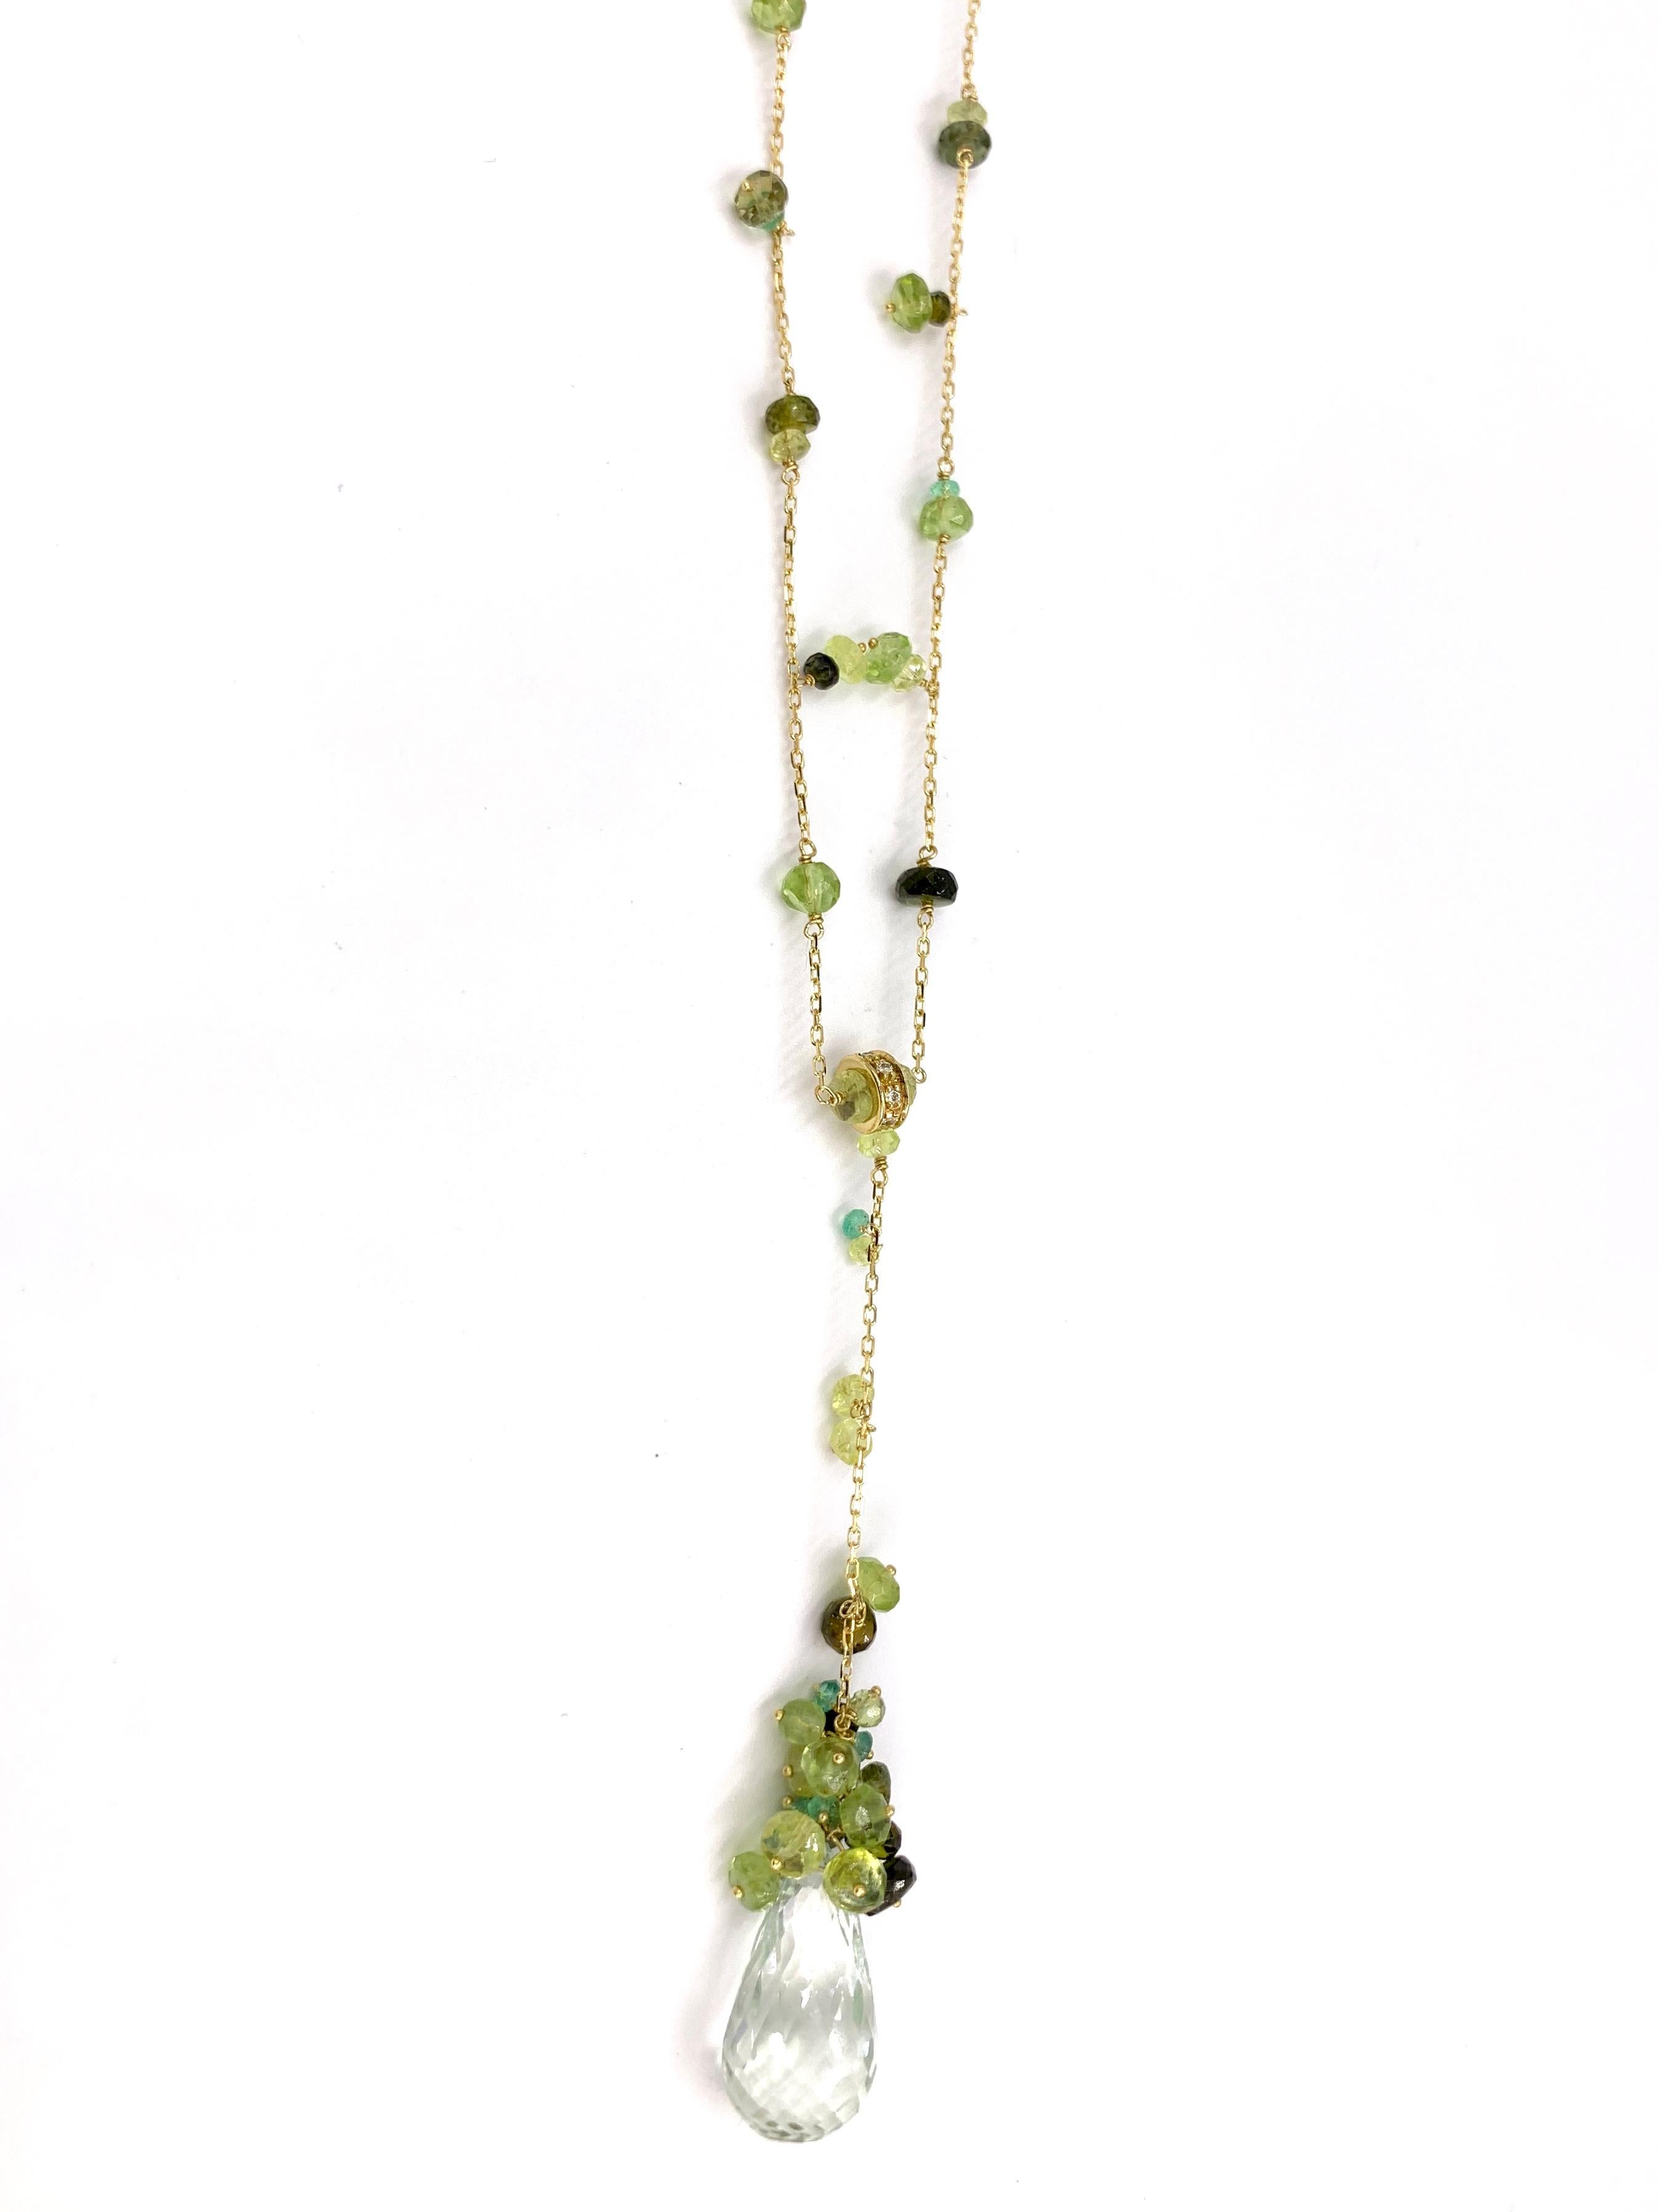 Created by high jewelry Italian designer, Mariani. This 18 karat yellow gold lariat style necklace features a beautifully faceted 14 carat green amethyst gemstone that dangles from the cable chain featuring emeralds and green tourmaline arranged in